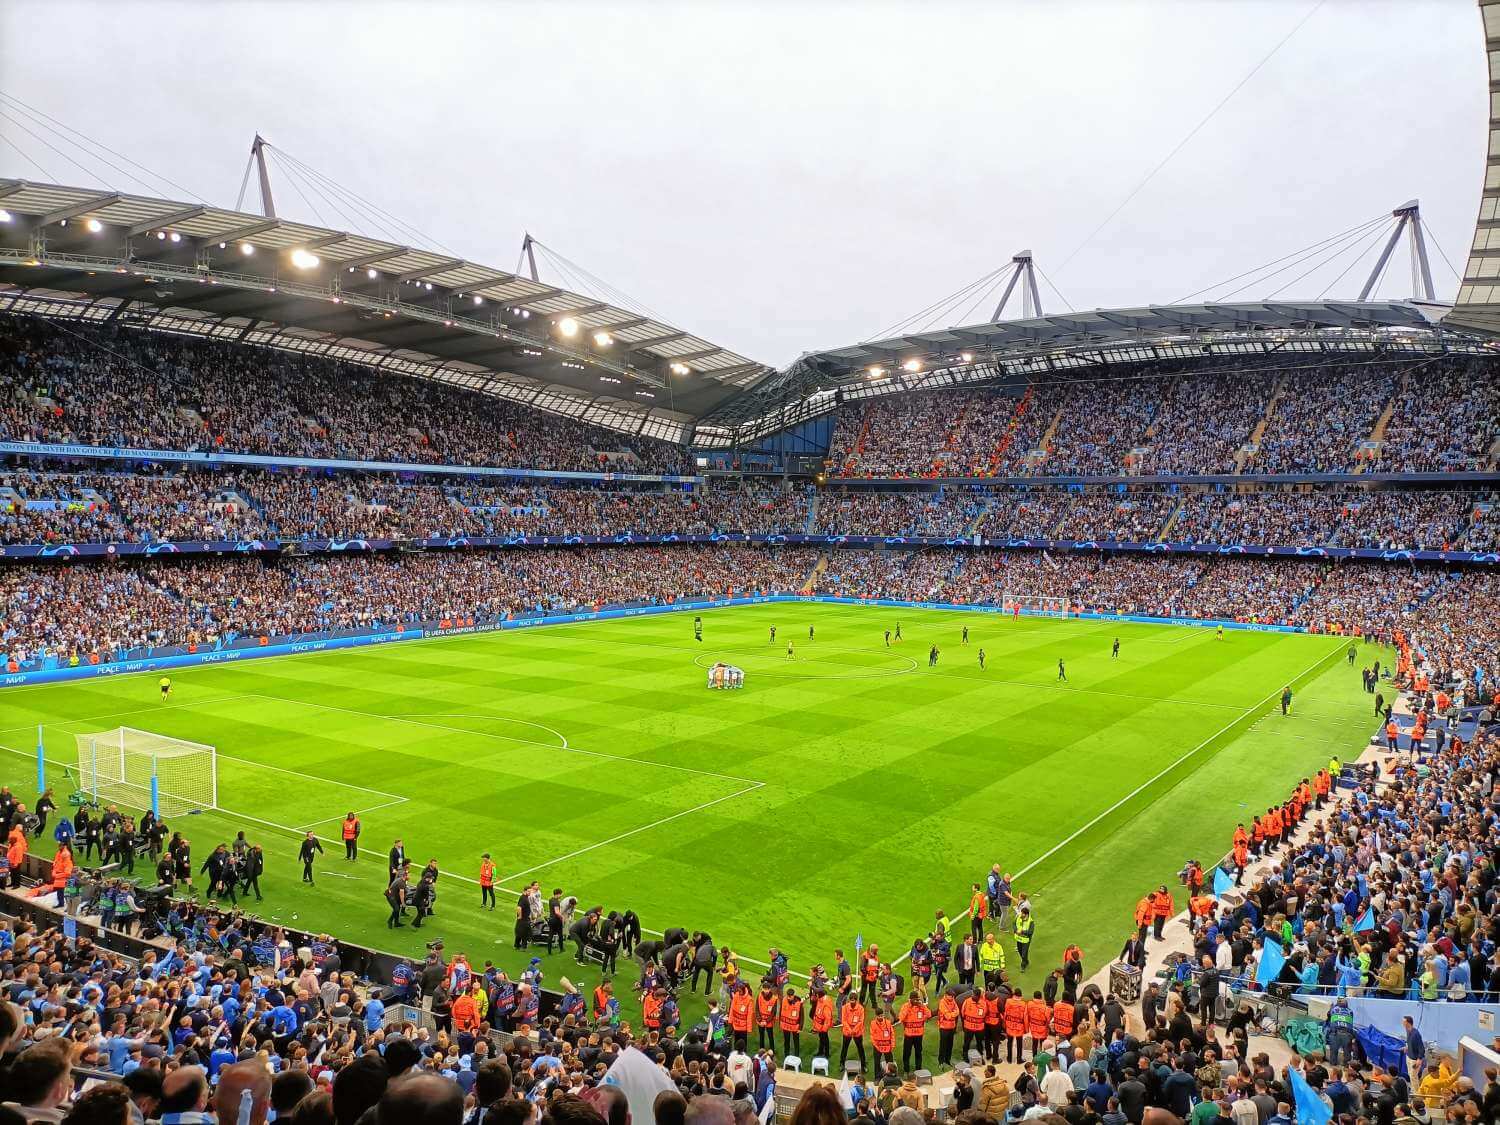 View of Champions league semi final  at Etihad Stadium Manchester from Seat Block 233, Row H, Seat 909